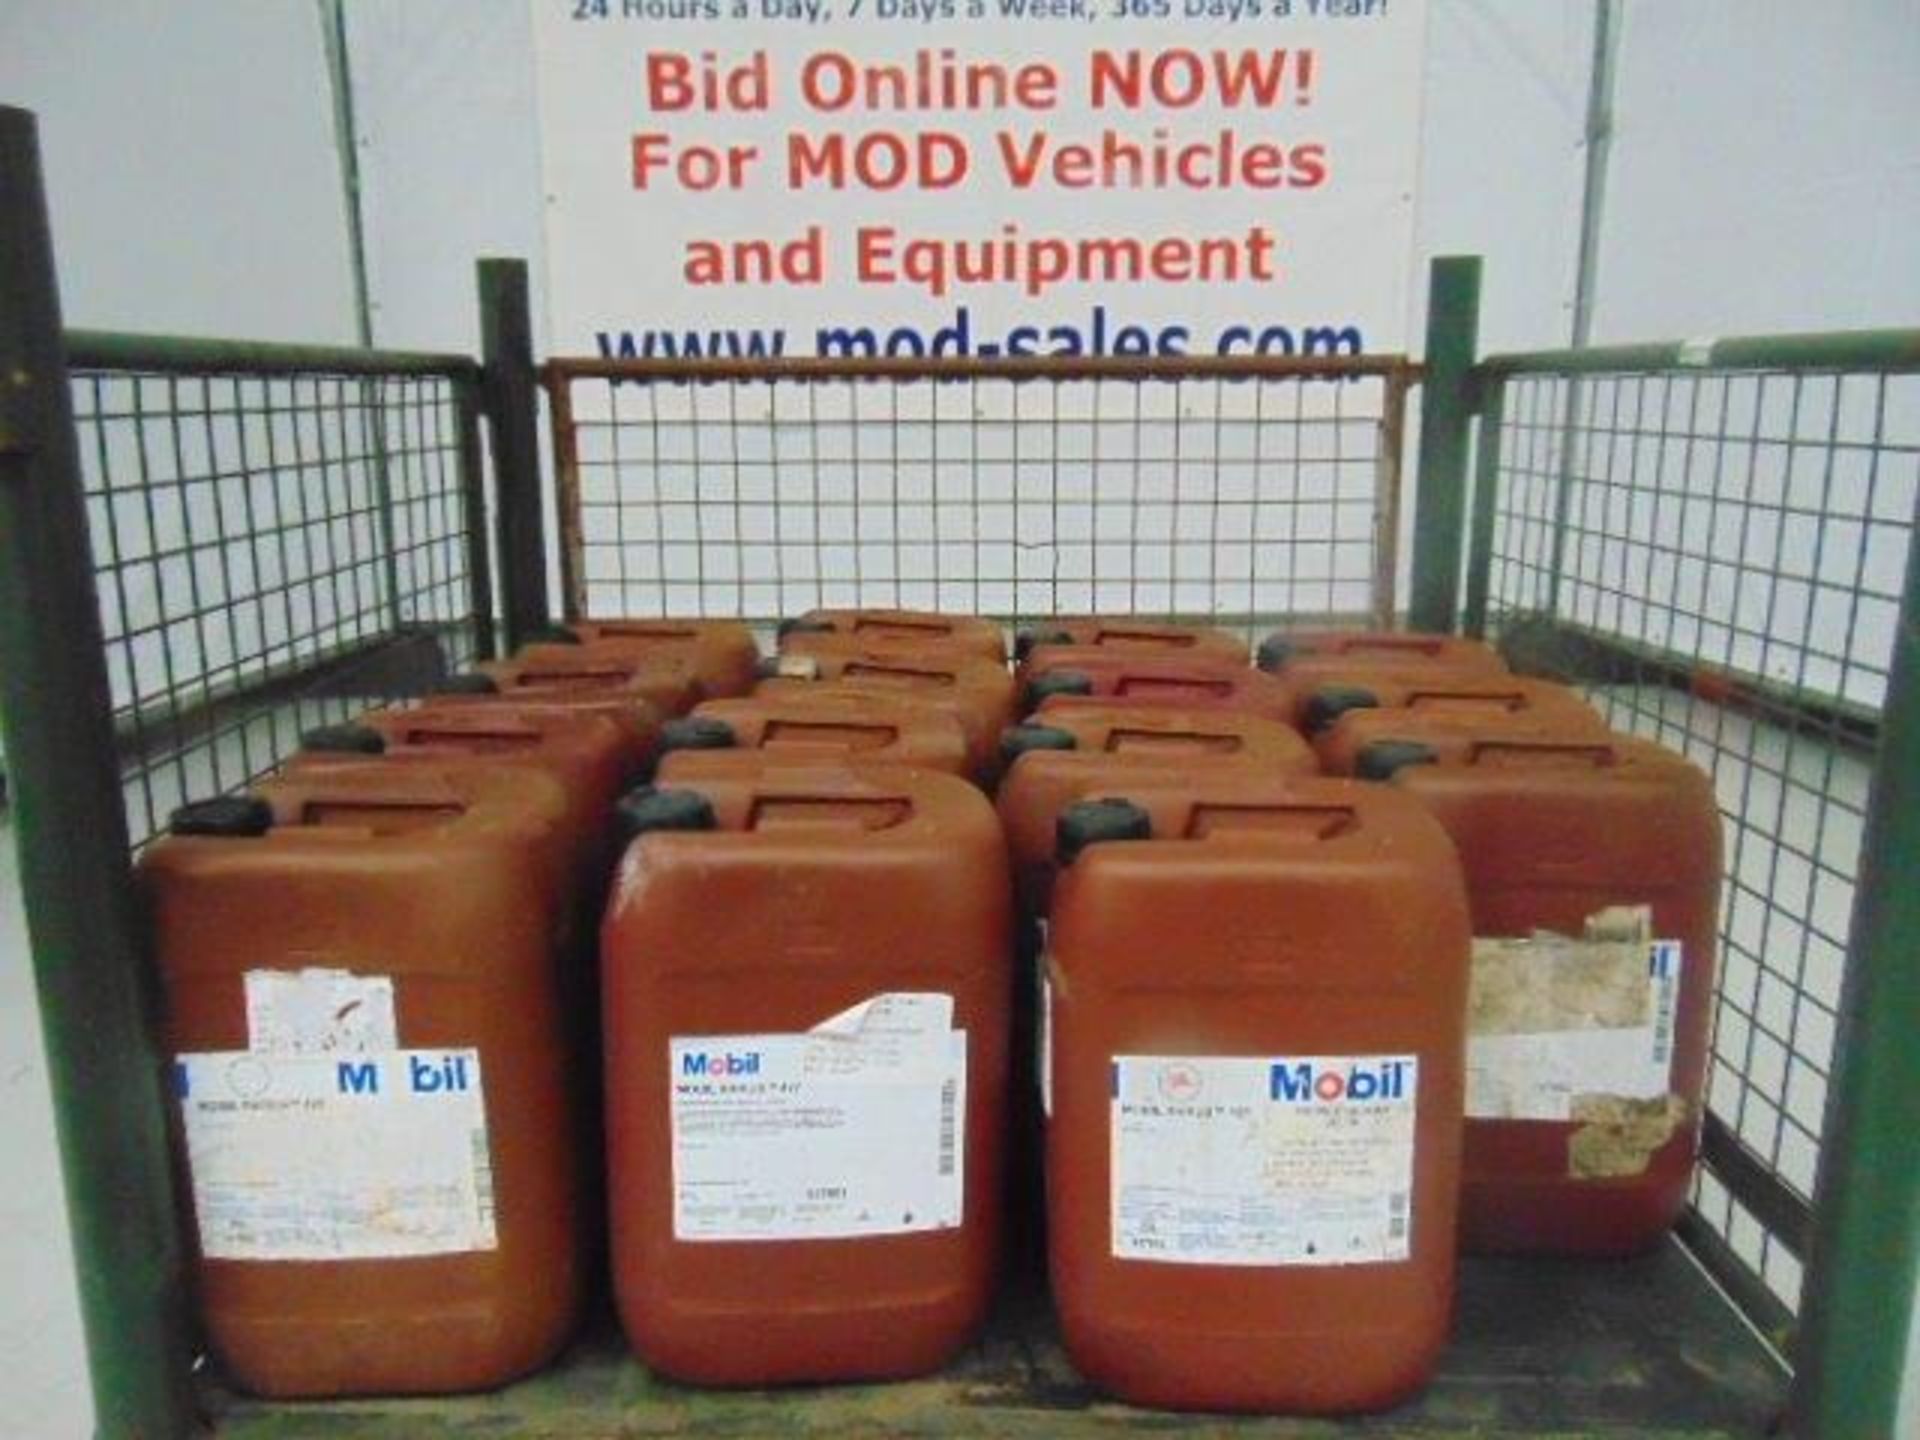 15 x Unissued 20L Drums of Mobil Rarus 427 Air Compressor Lubricant / Oil